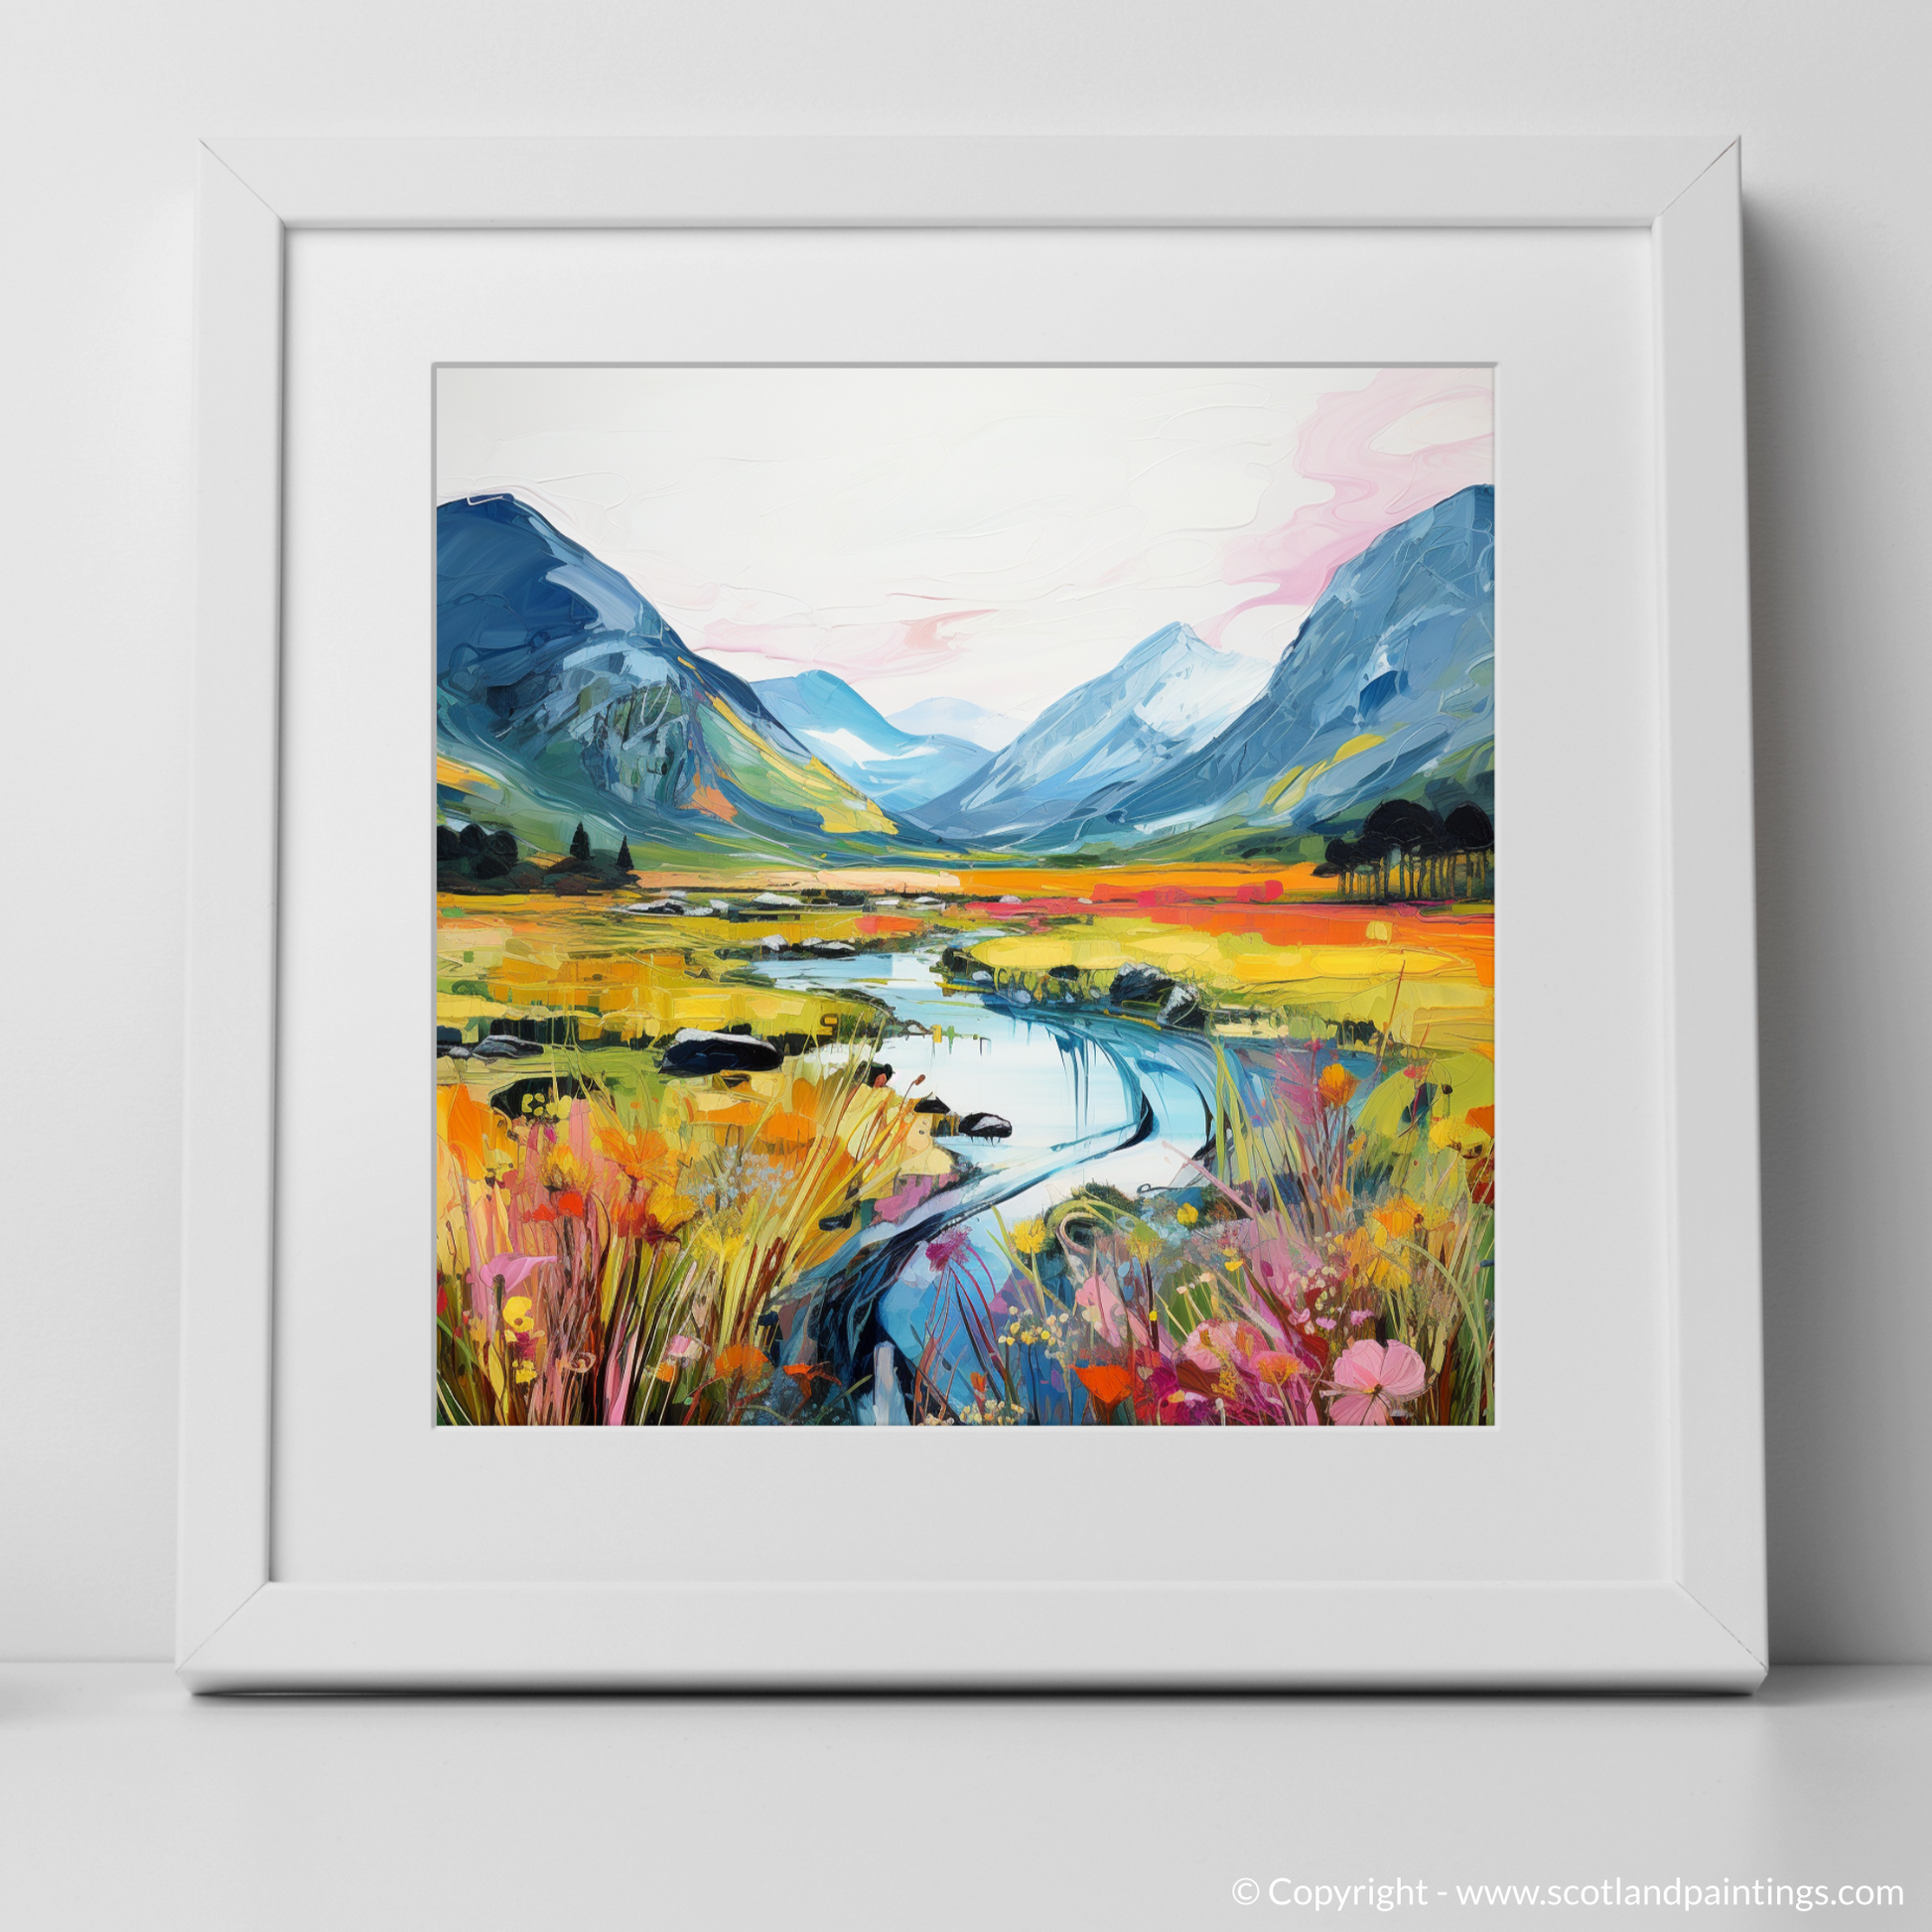 Art Print of Glen Coe, Highlands in summer with a white frame